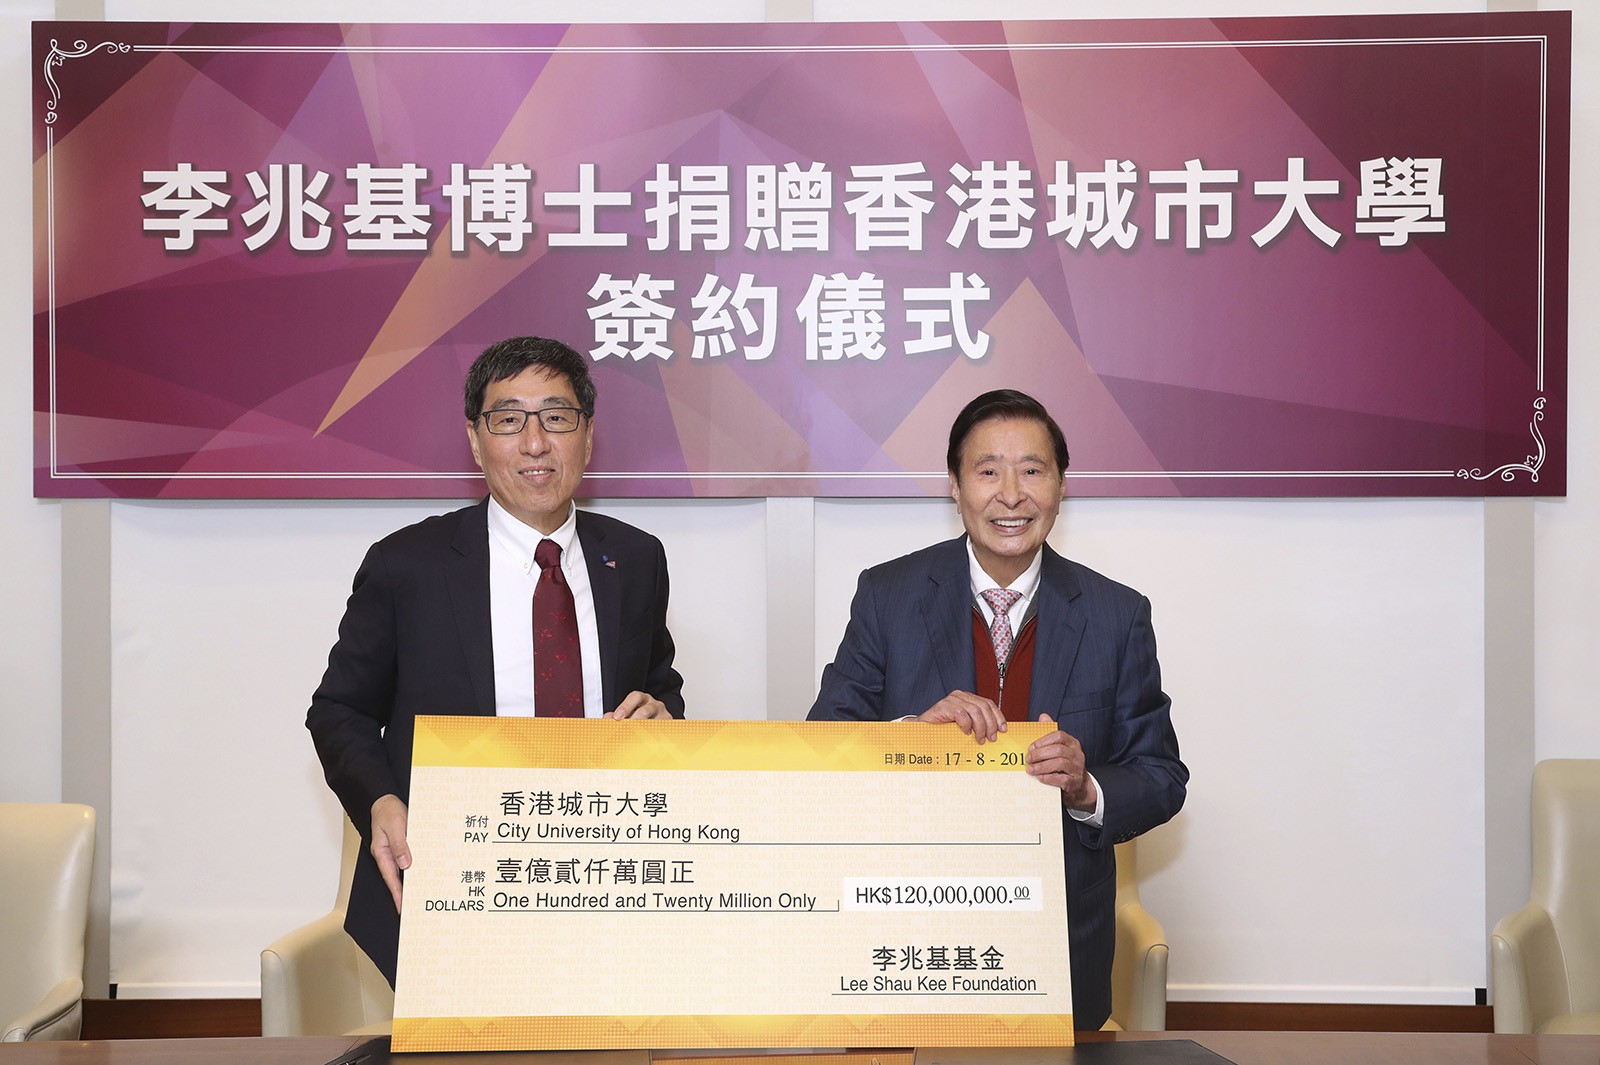 HK$120 million gift to CityU from Dr Lee Shau-kee